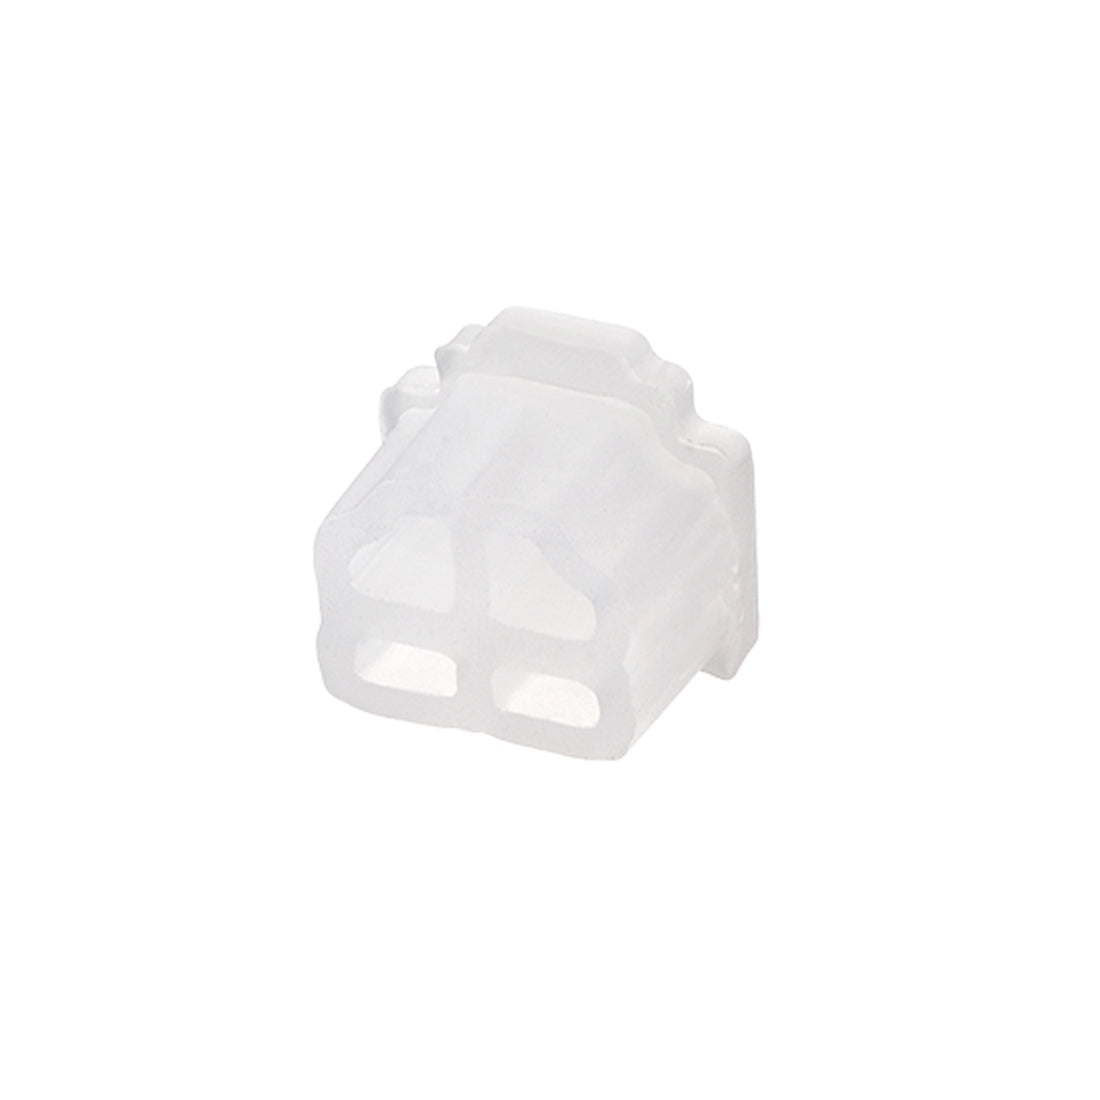 uxcell Uxcell Silicone Telephone Modular Port RJ11 Anti-Dust Stopper Cap Cover Clear 10pcs